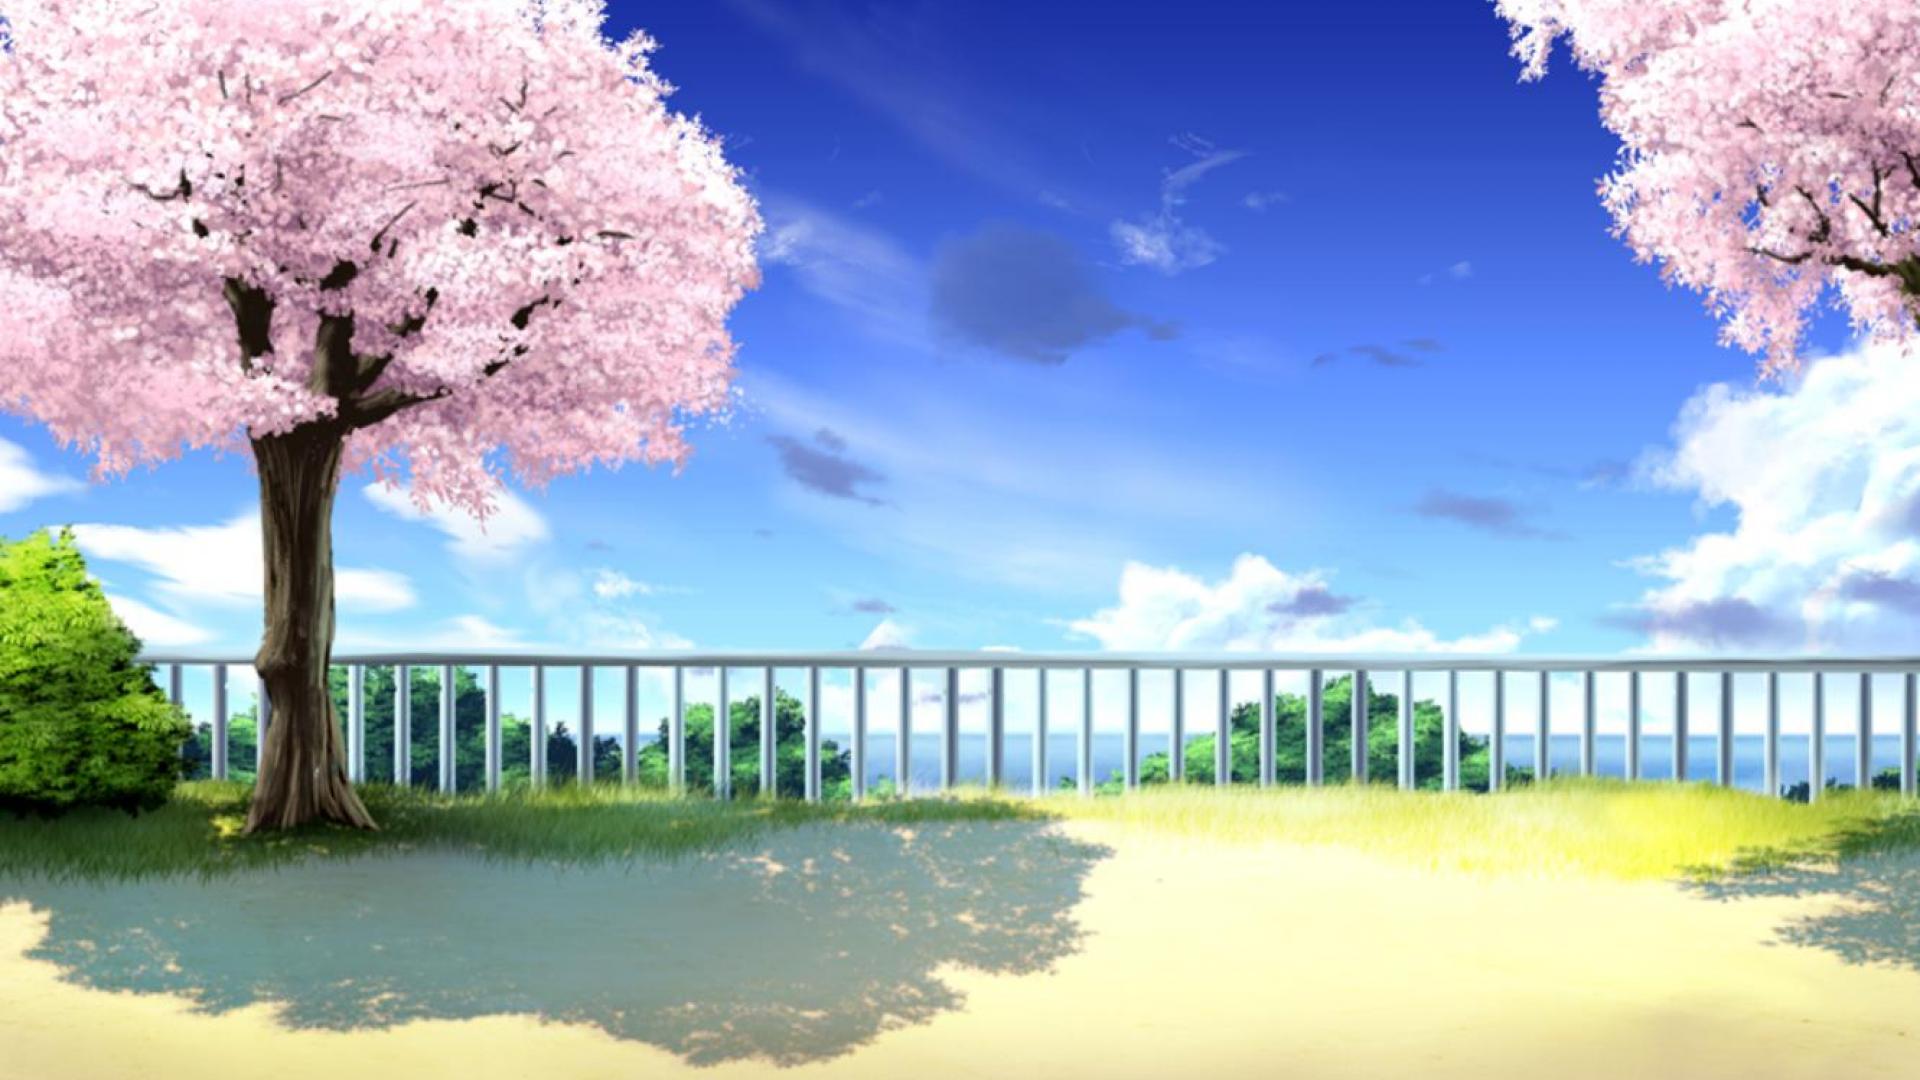 22+ Top Cherry Blossom Anime Background Easy Download | Lumegram